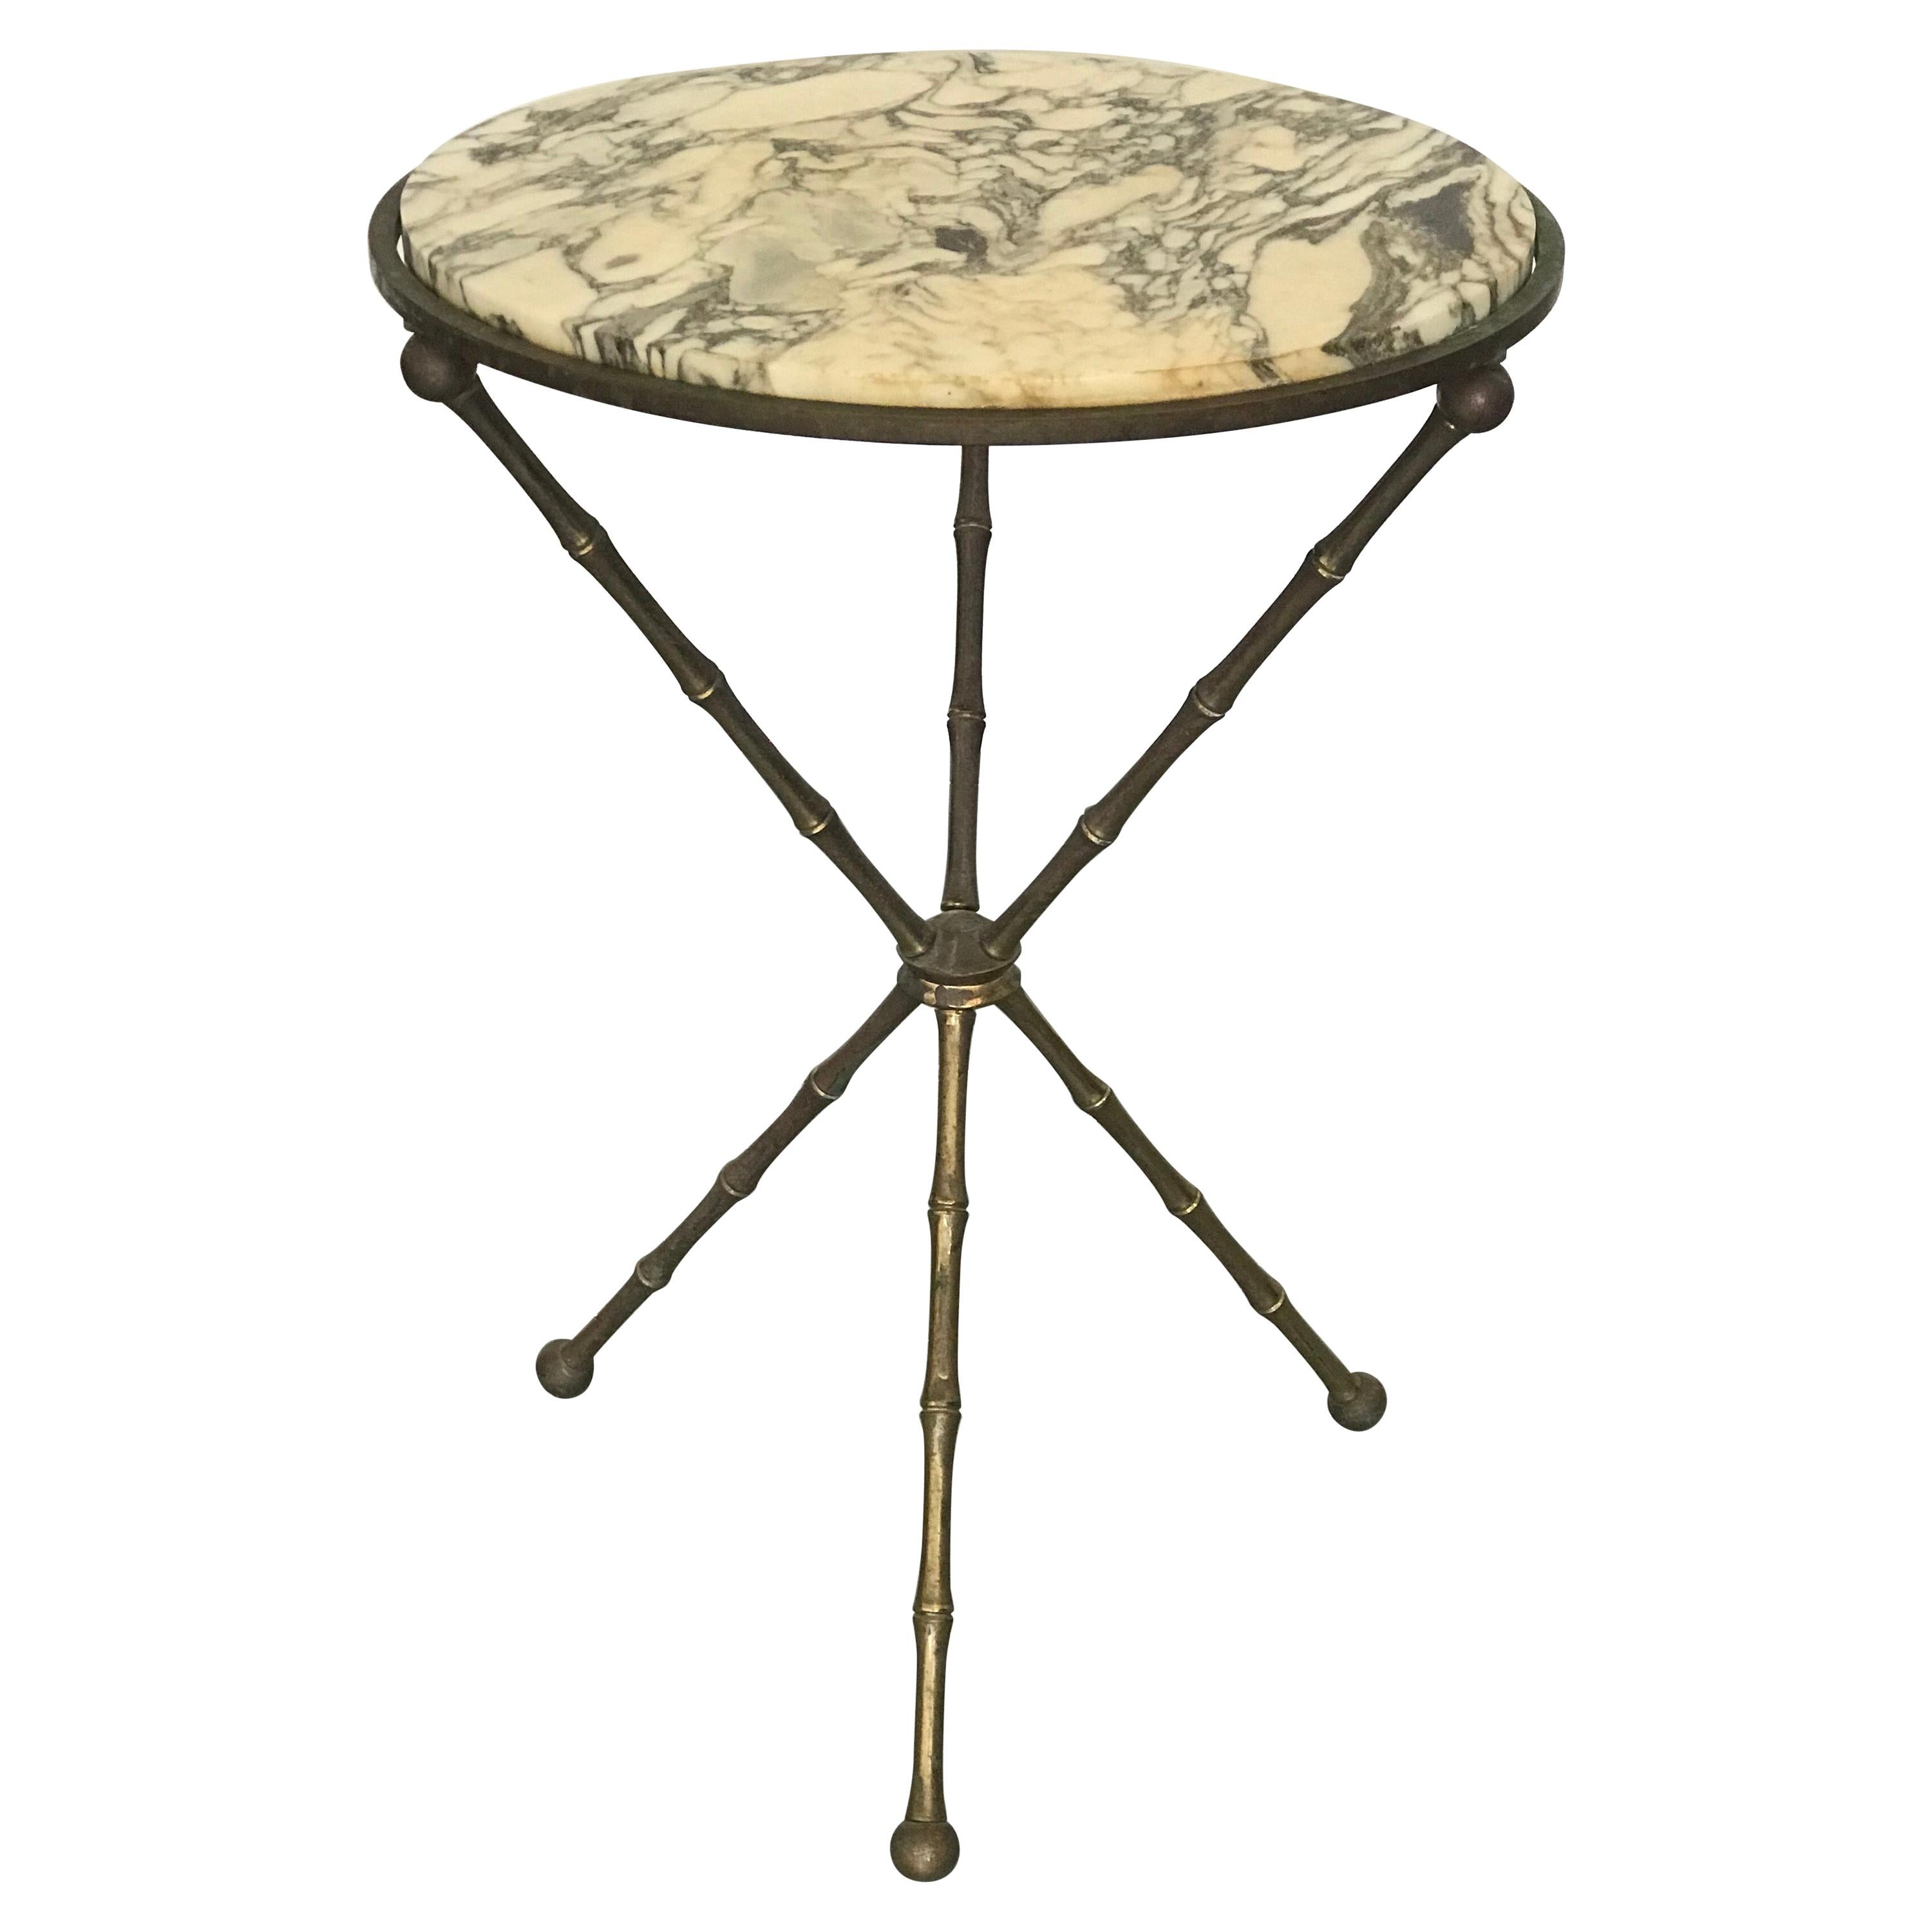 Maison Baguès attr. French Hollywood Regency Gueridon Table; Brass and Marble